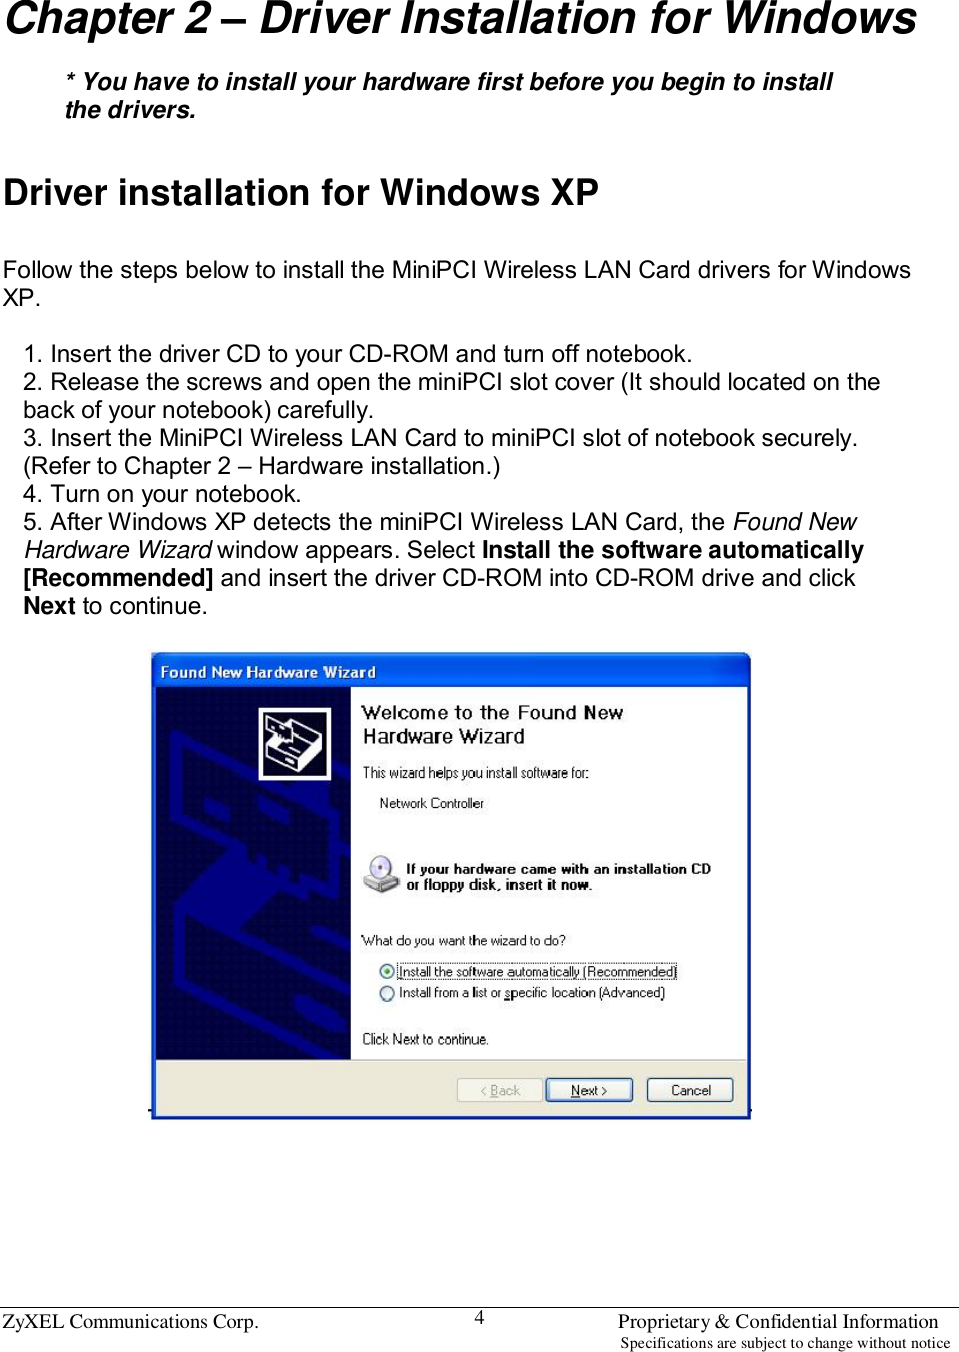  ZyXEL Communications Corp.                                                                       Proprietary &amp; Confidential Information                                                                                                                           Specifications are subject to change without notice 4 Chapter 2 – Driver Installation for Windows  * You have to install your hardware first before you begin to install the drivers.   Driver installation for Windows XP  Follow the steps below to install the MiniPCI Wireless LAN Card drivers for Windows XP.  1. Insert the driver CD to your CD-ROM and turn off notebook. 2. Release the screws and open the miniPCI slot cover (It should located on the back of your notebook) carefully. 3. Insert the MiniPCI Wireless LAN Card to miniPCI slot of notebook securely. (Refer to Chapter 2 – Hardware installation.) 4. Turn on your notebook. 5. After Windows XP detects the miniPCI Wireless LAN Card, the Found New Hardware Wizard window appears. Select Install the software automatically [Recommended] and insert the driver CD-ROM into CD-ROM drive and click Next to continue.        